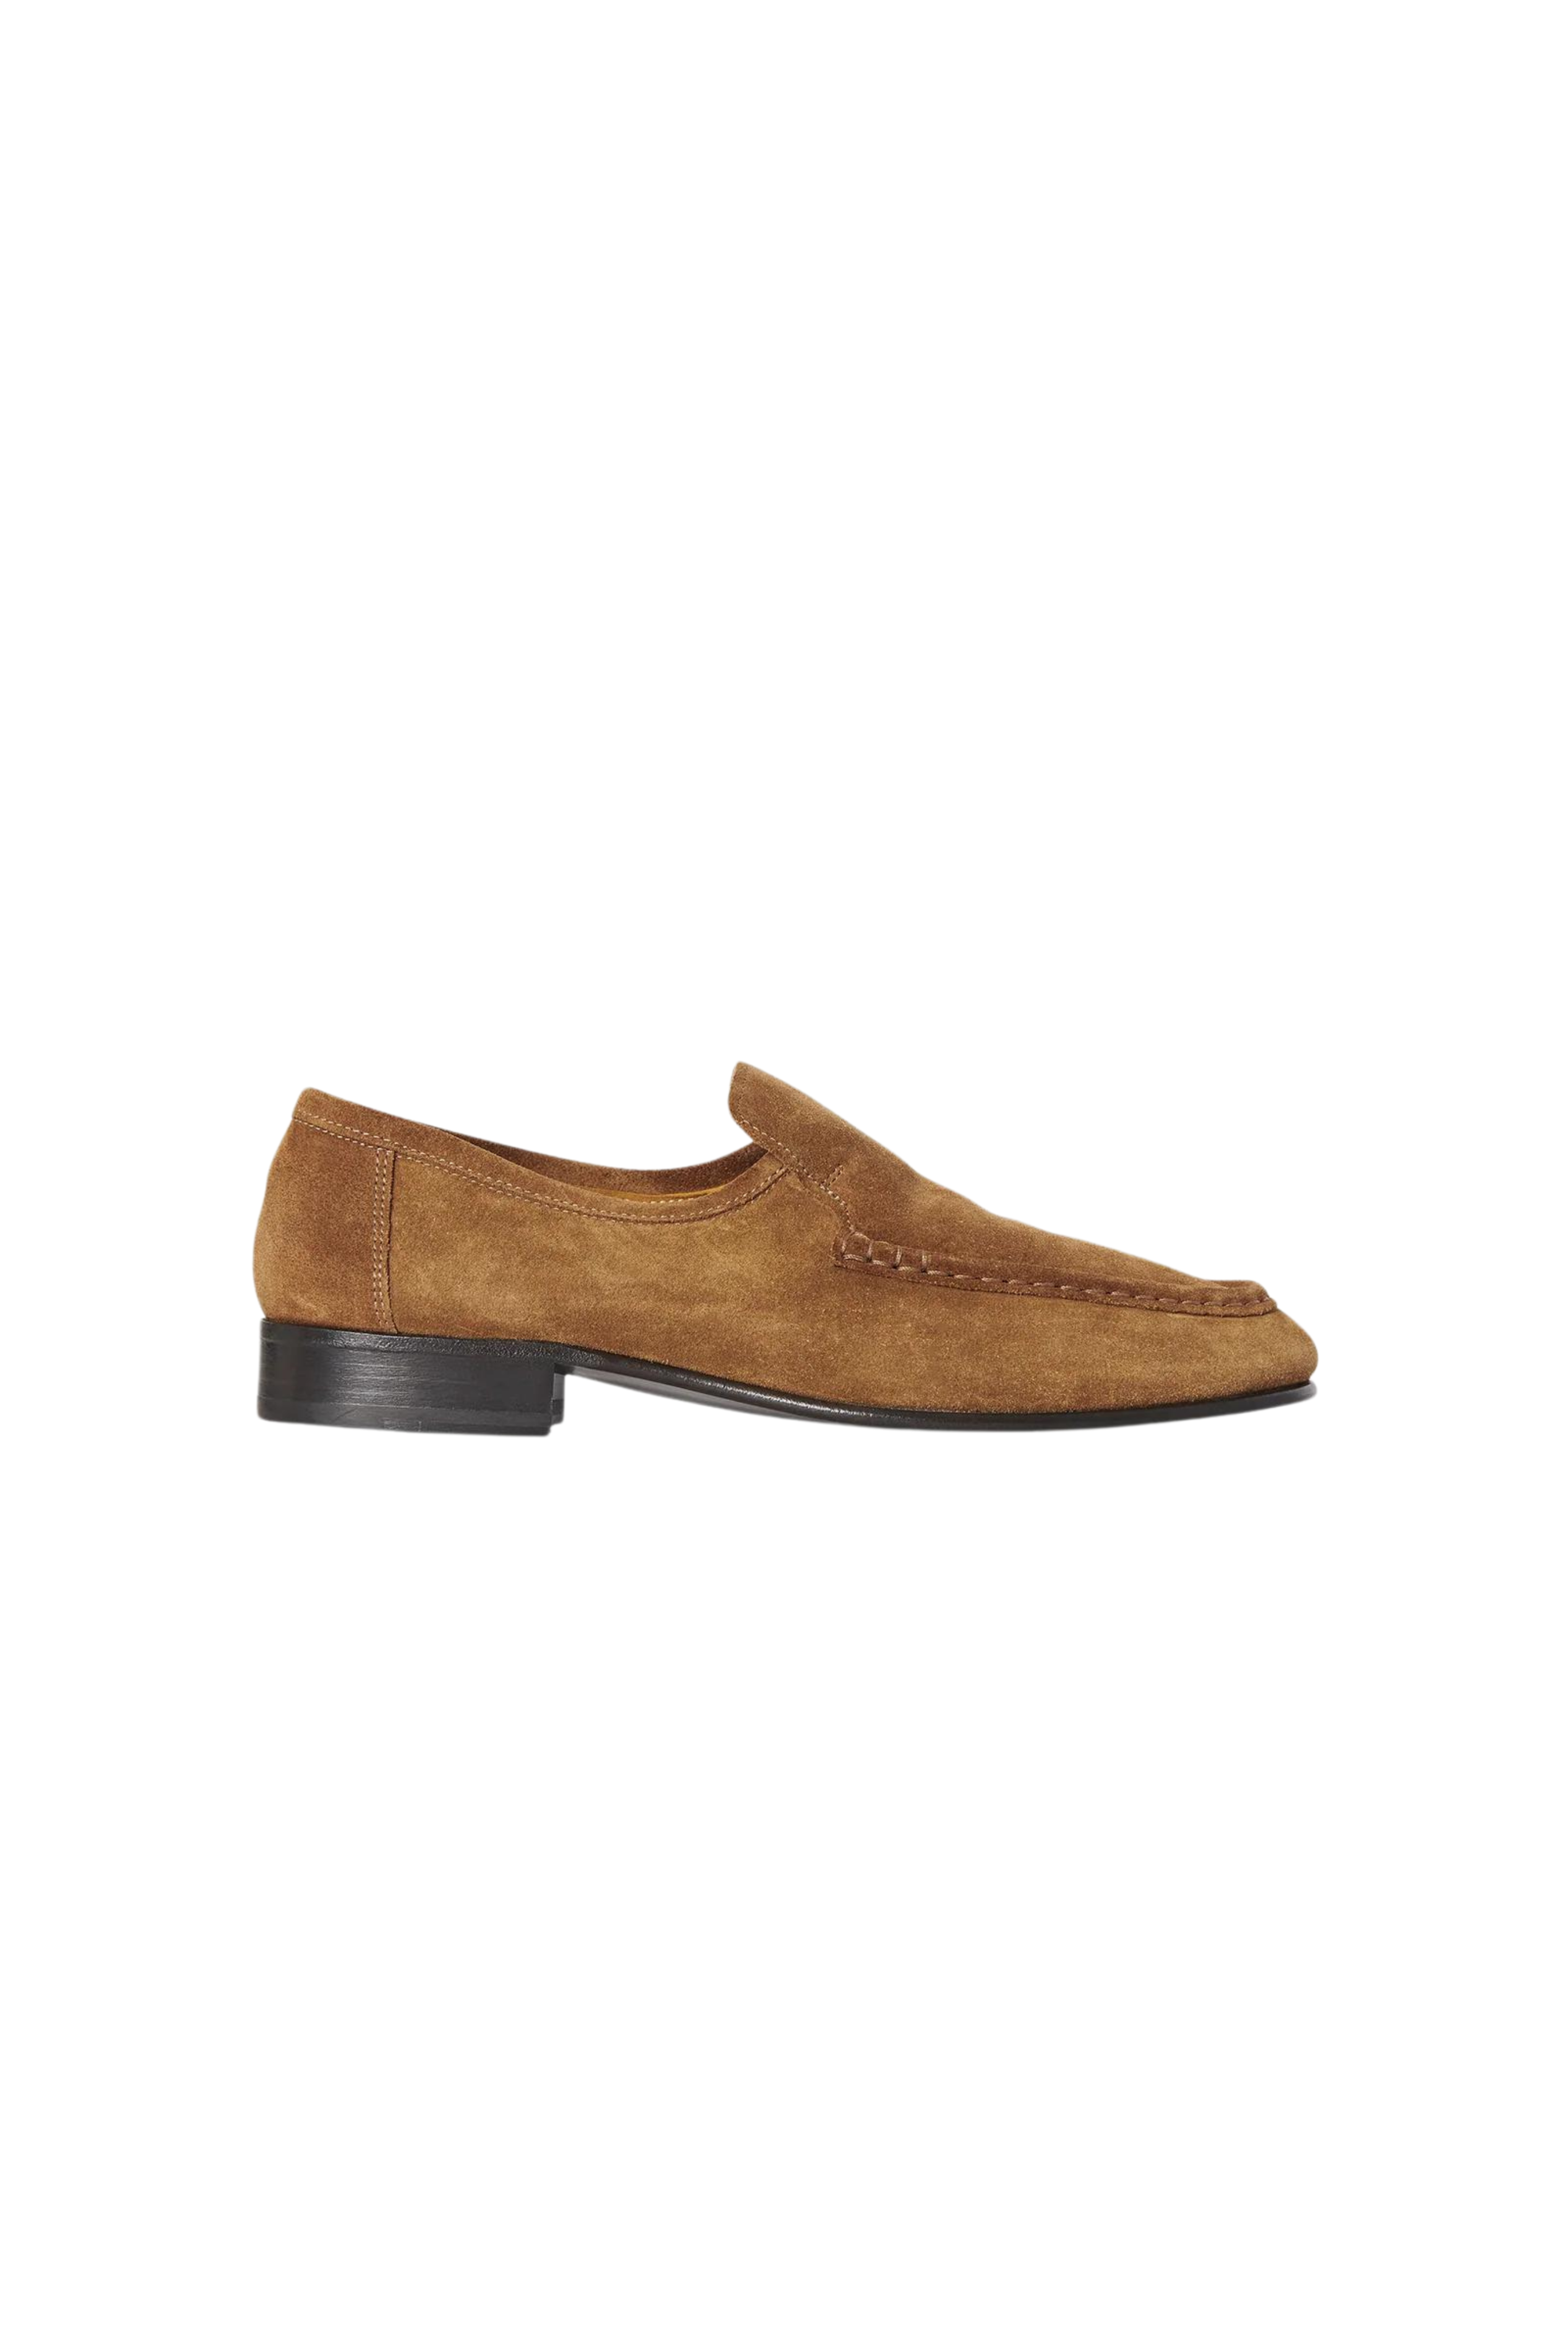 THE ROW New Soft Suede Loafers